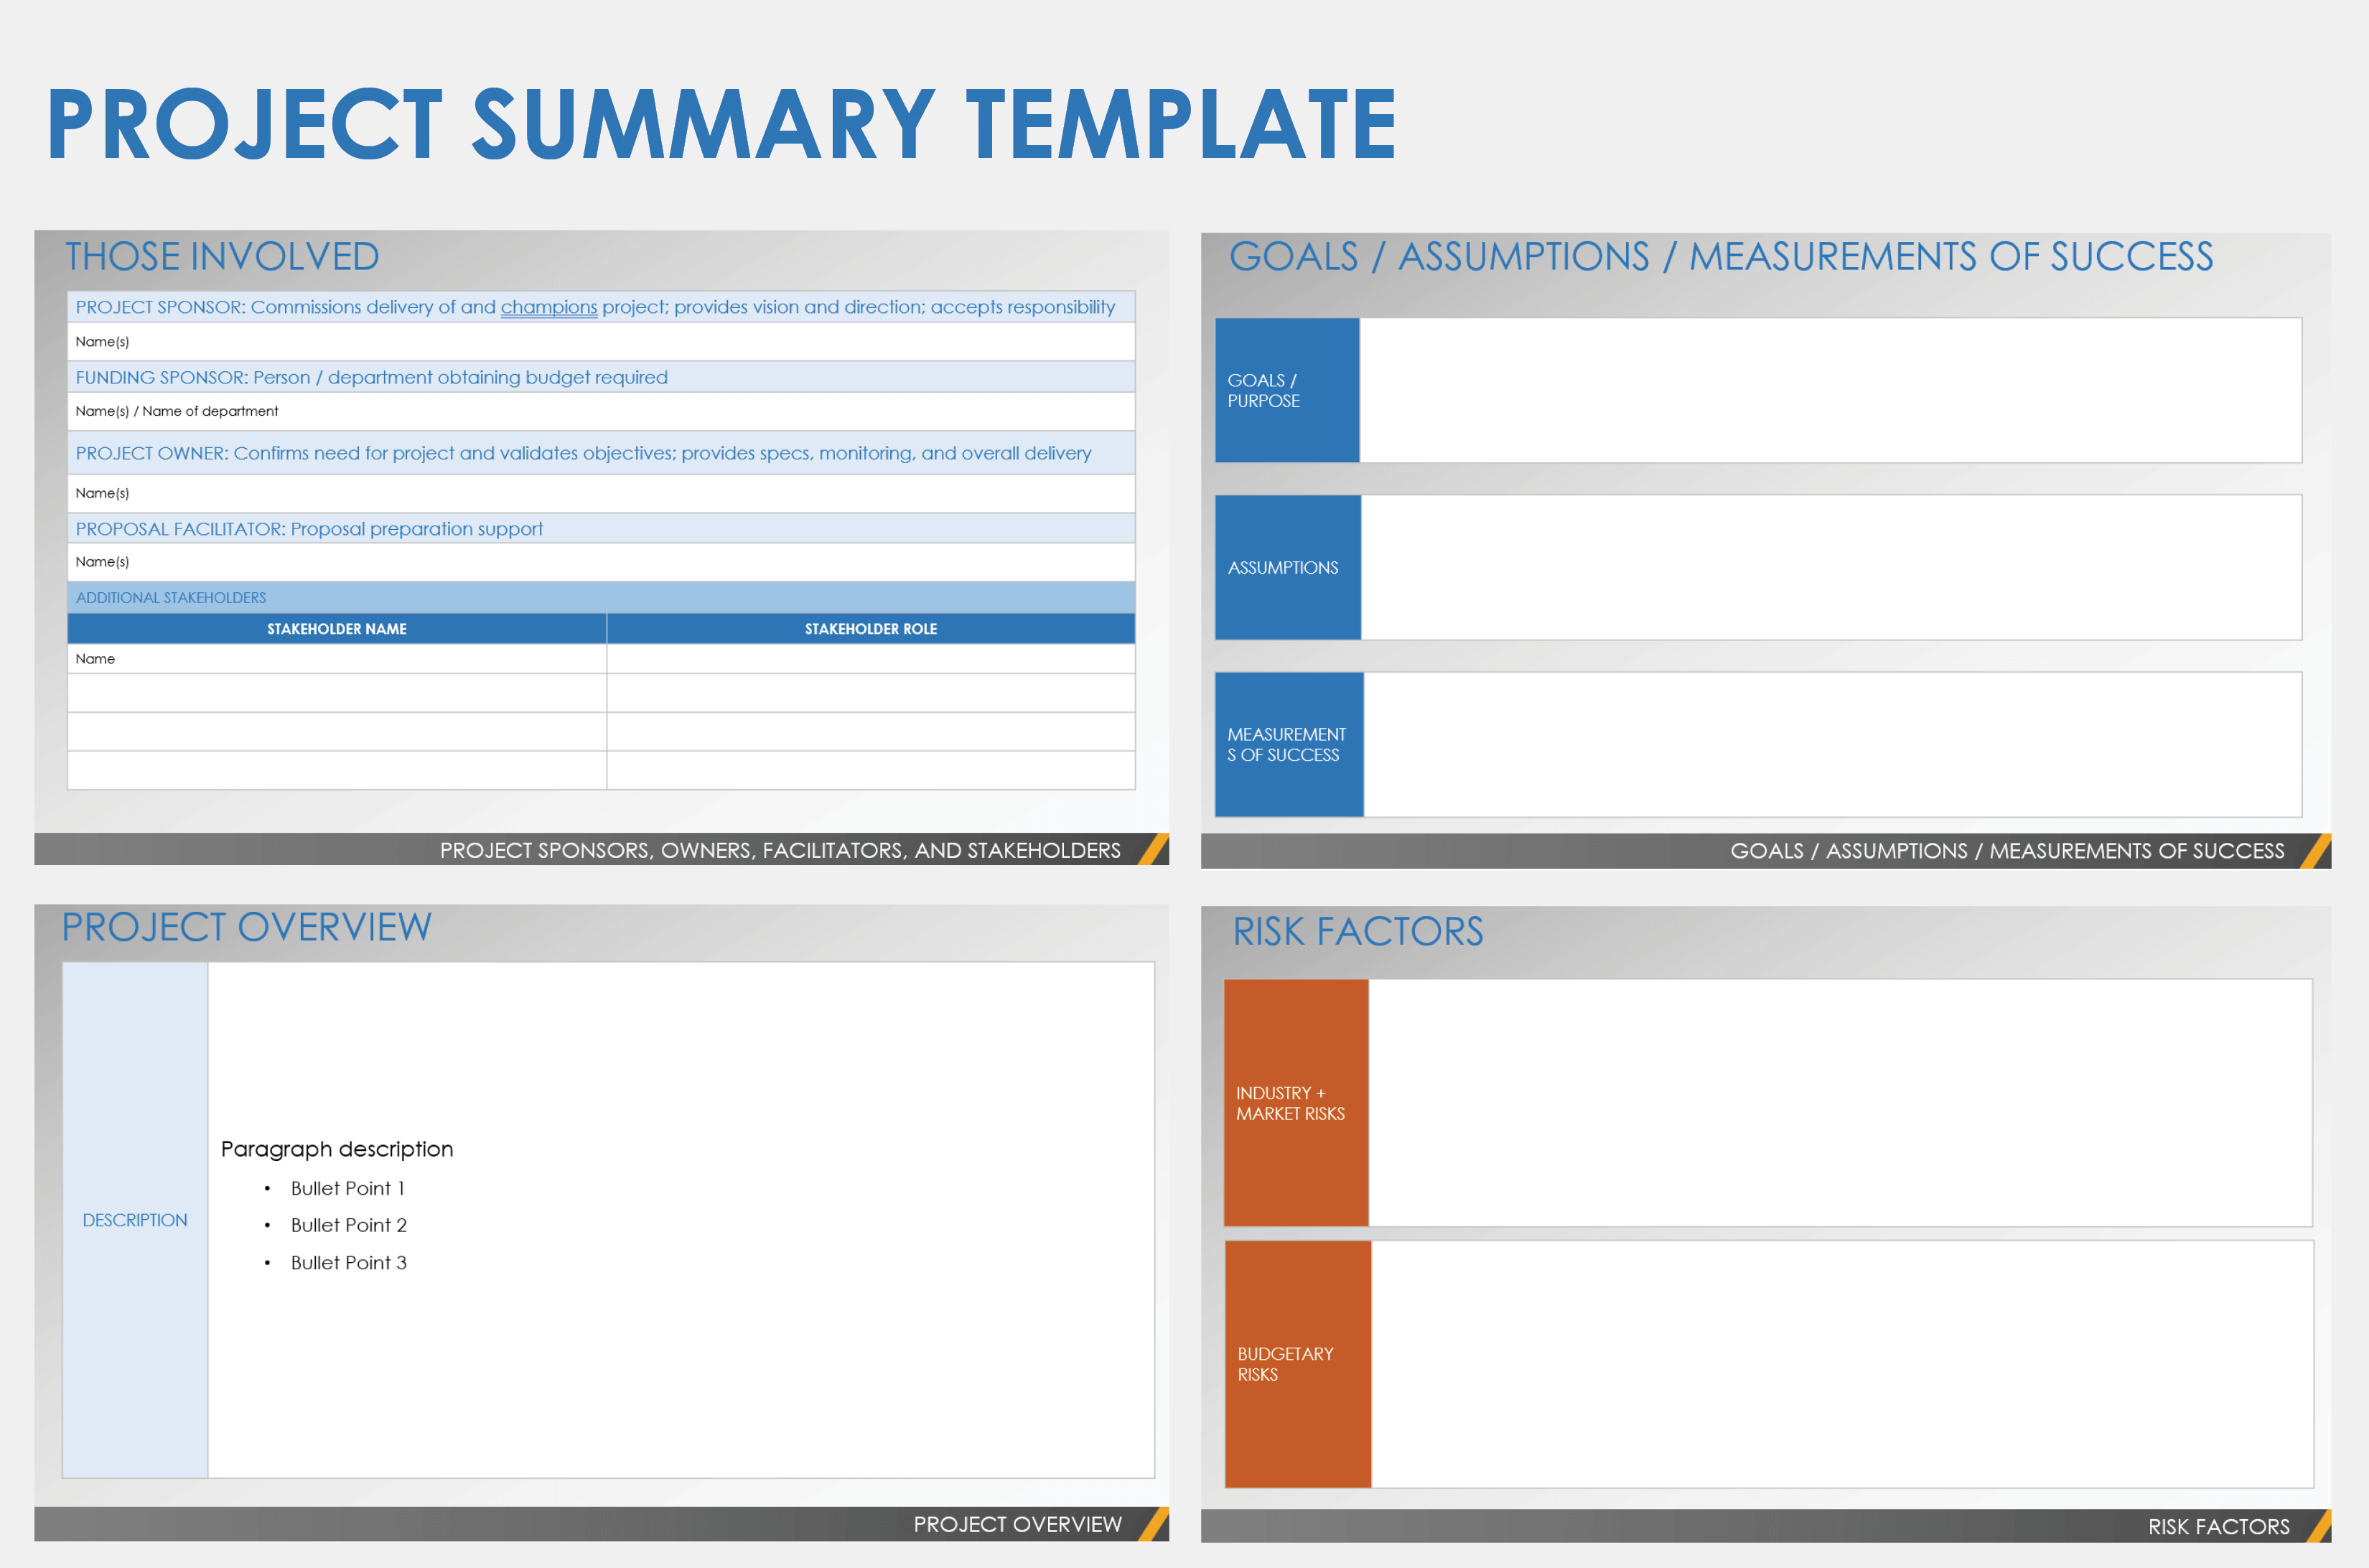 Project Summary Template PowerPoint